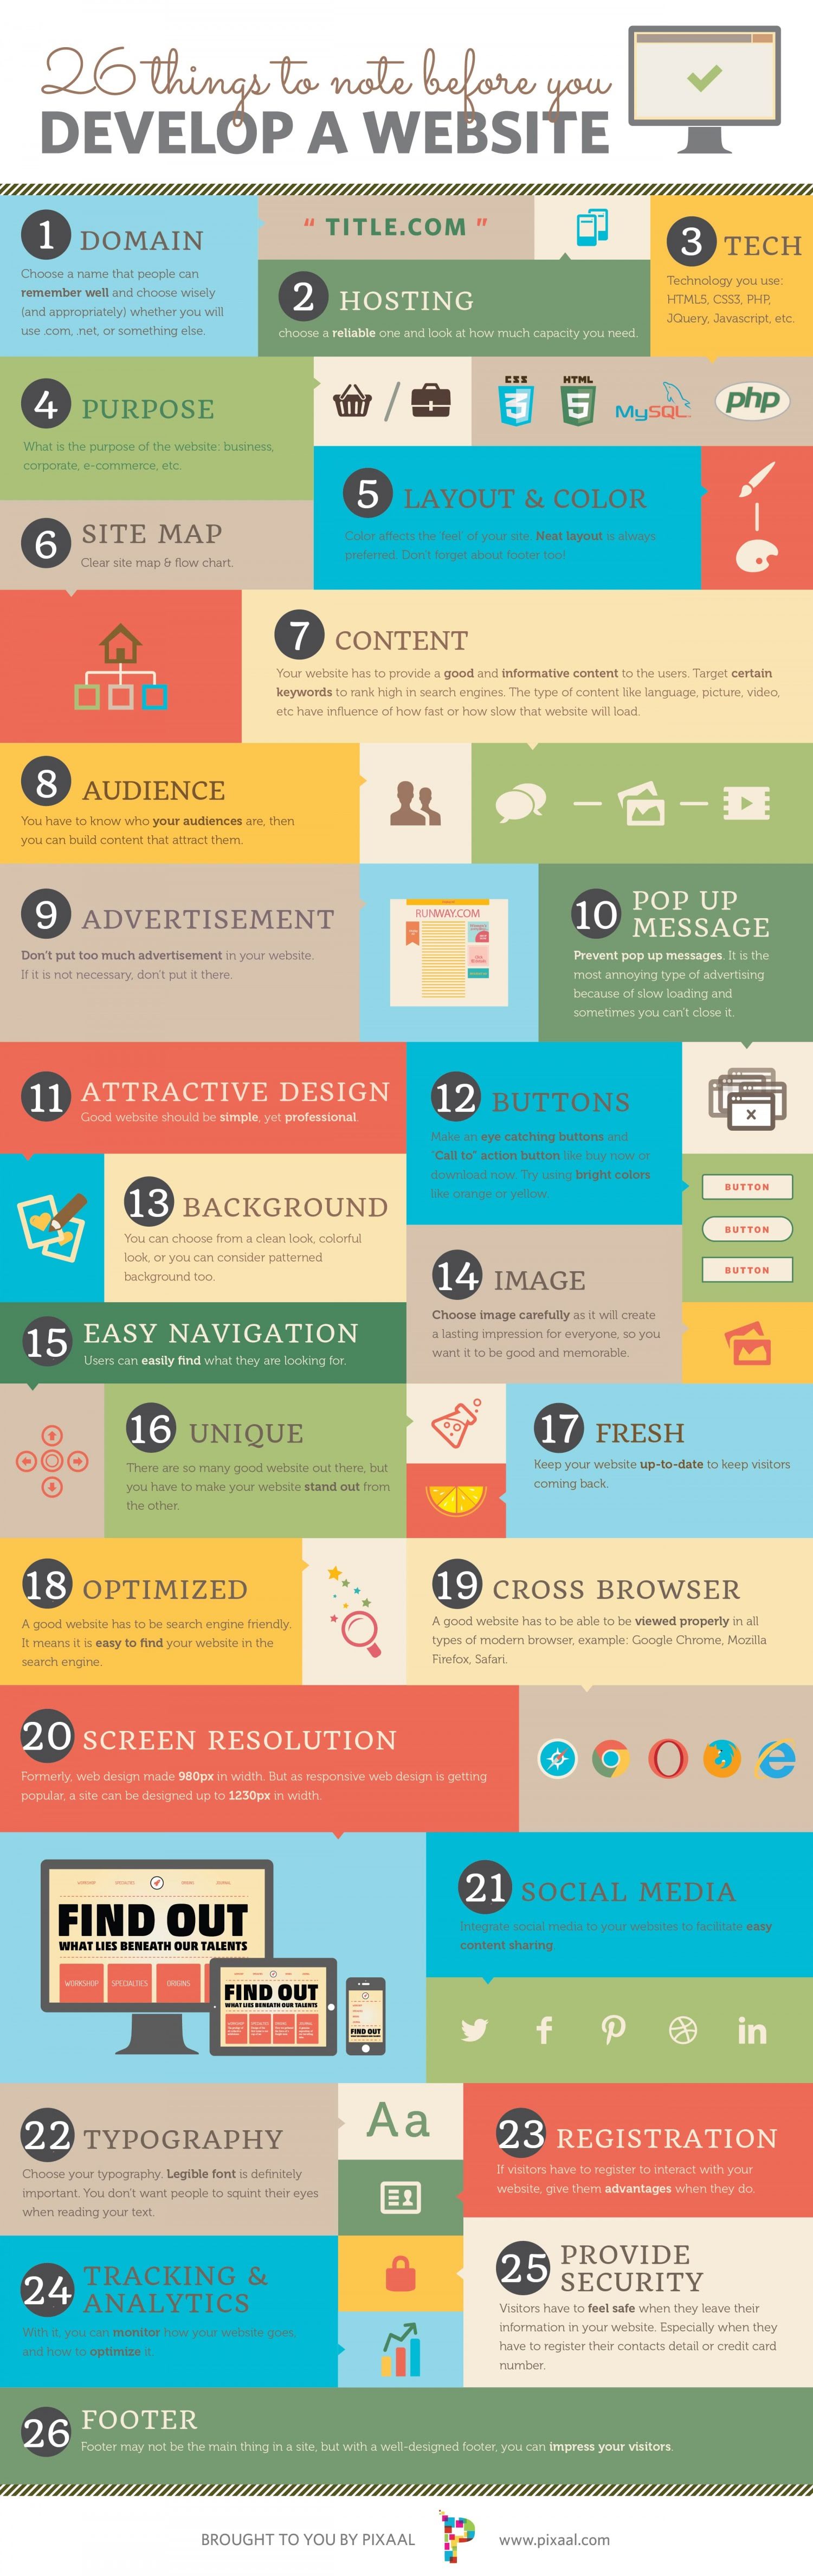 This infographic from Pixaal showing the basic things to note before someone or company develop a website. Pixaal has summarized it all to 26 things that are really crucial to develop a website.